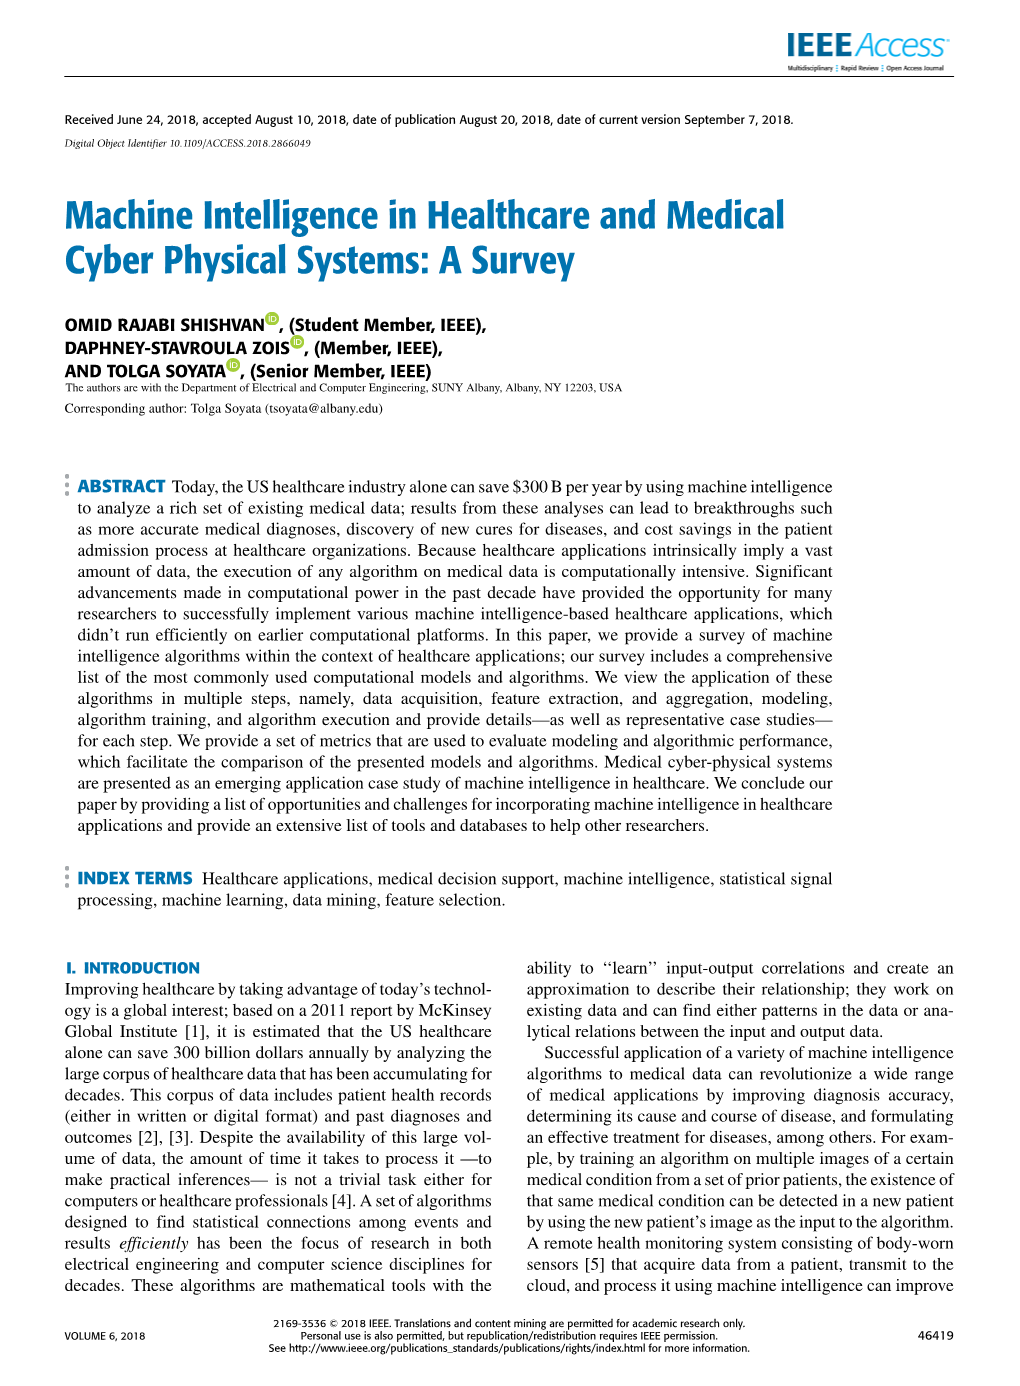 Machine Intelligence in Healthcare and Medical Cyber Physical Systems: a Survey